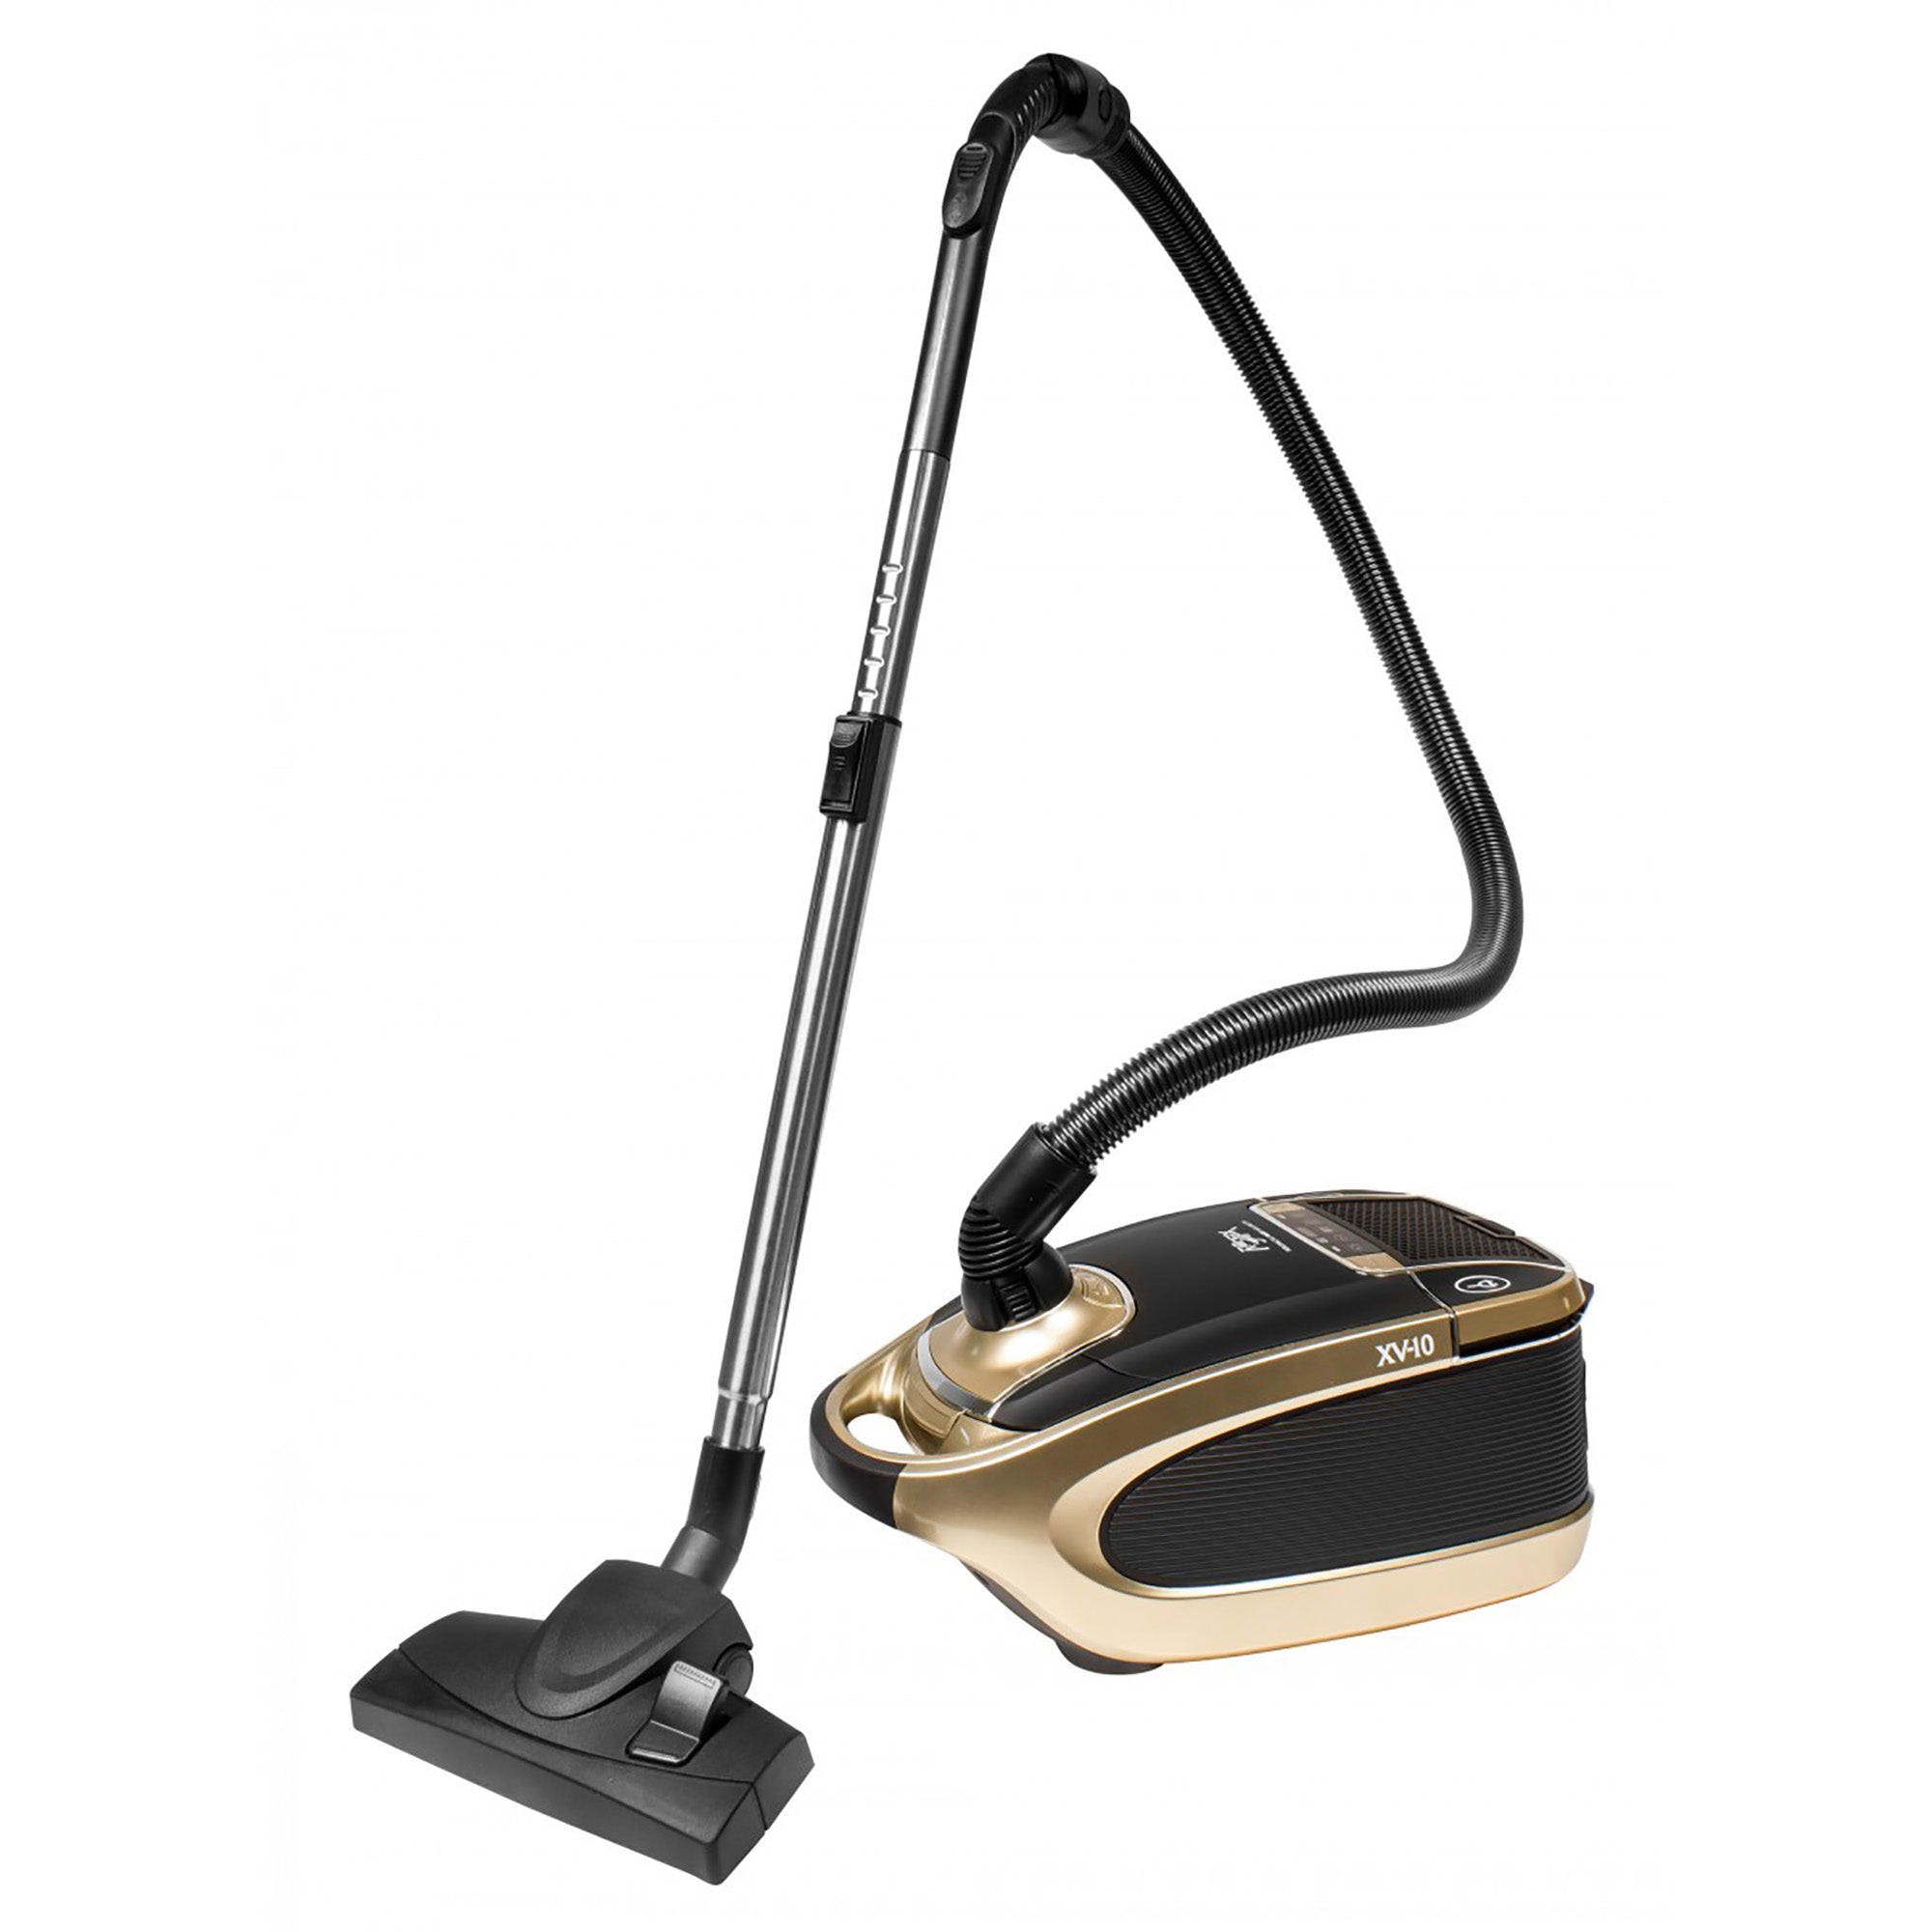 Johnny Vac XV10 Canister Vacuum with Digital Controls